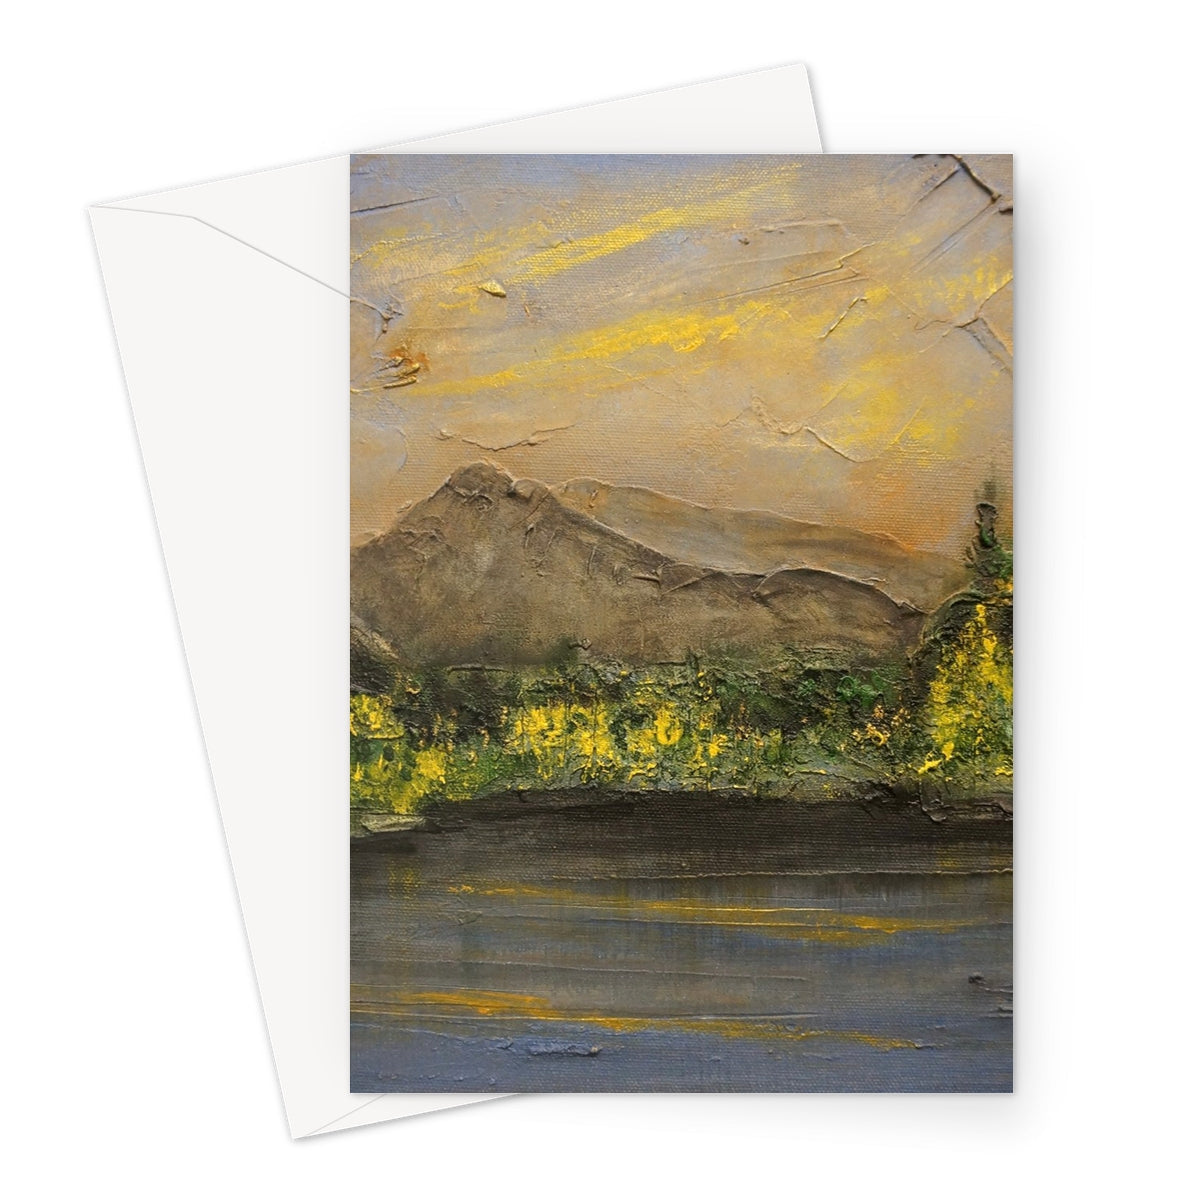 Glencoe Lochan Dusk Art Gifts Greeting Card-Greetings Cards-Scottish Lochs & Mountains Art Gallery-A5 Portrait-1 Card-Paintings, Prints, Homeware, Art Gifts From Scotland By Scottish Artist Kevin Hunter